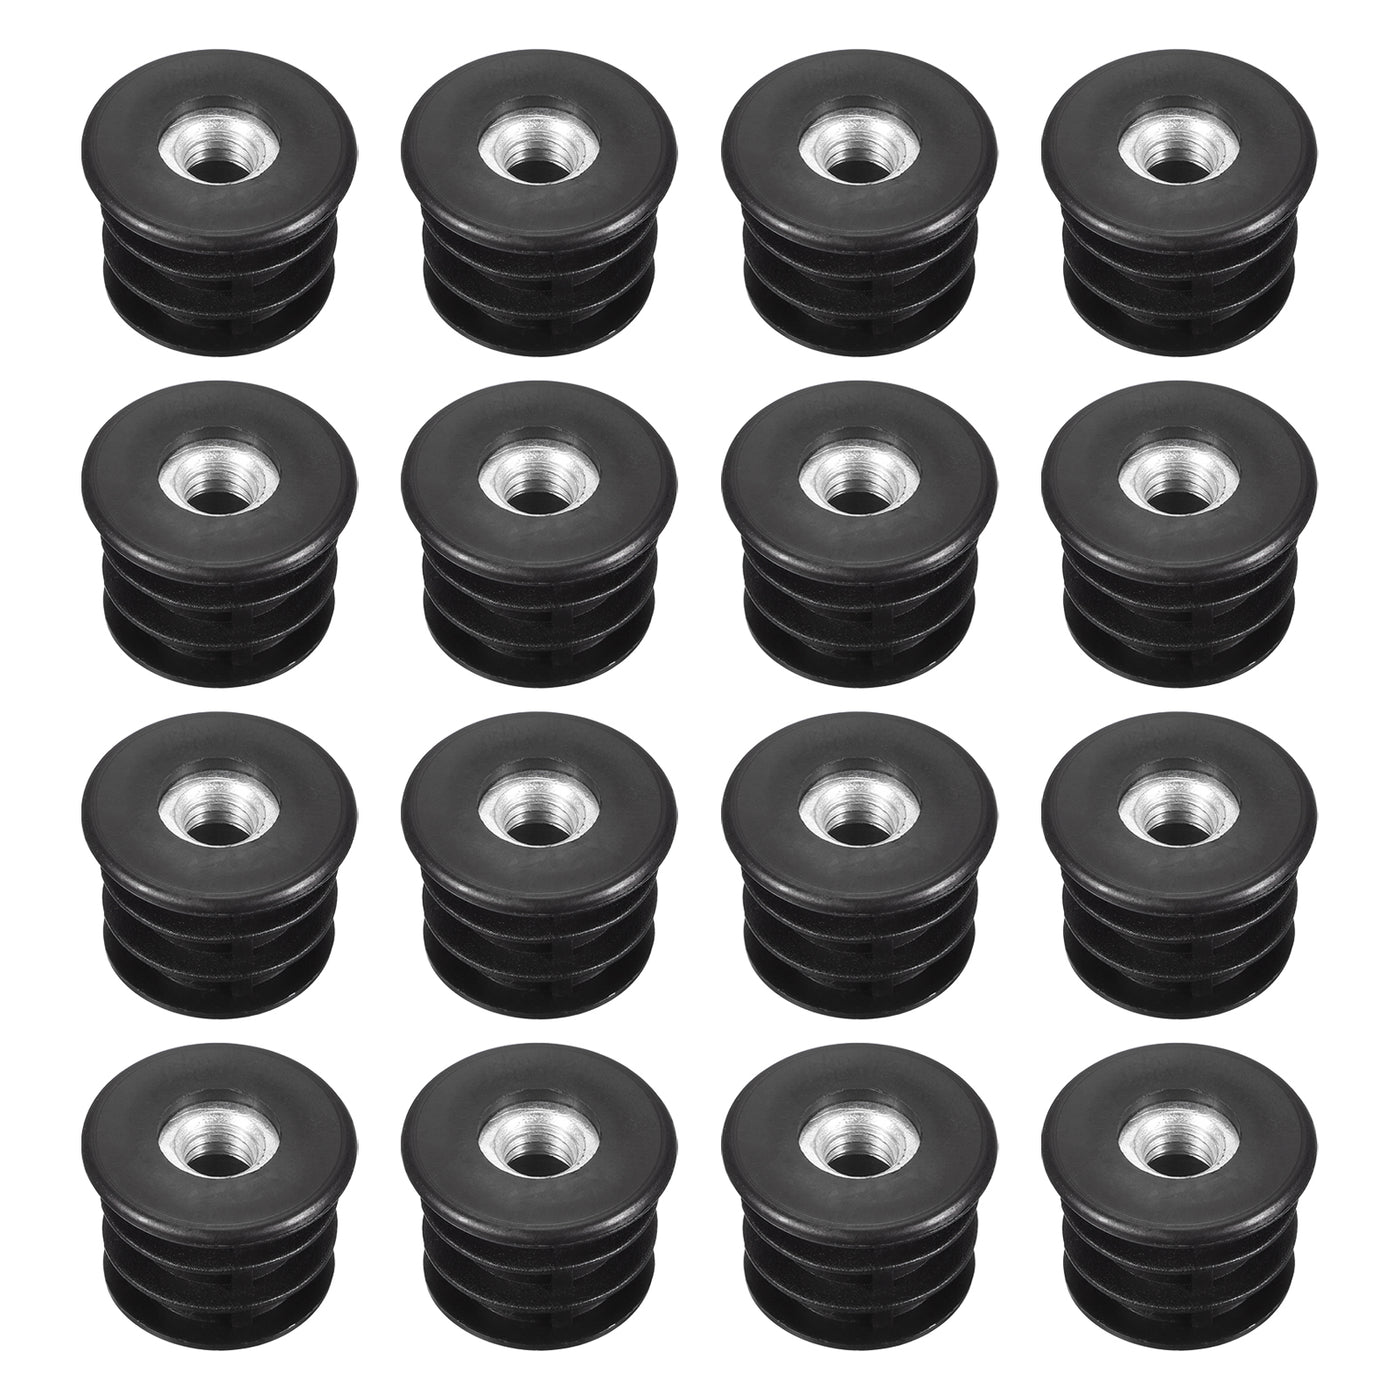 uxcell Uxcell 24Pcs Caster Insert with Thread, 25mm/0.98" M8 Thread for Furniture